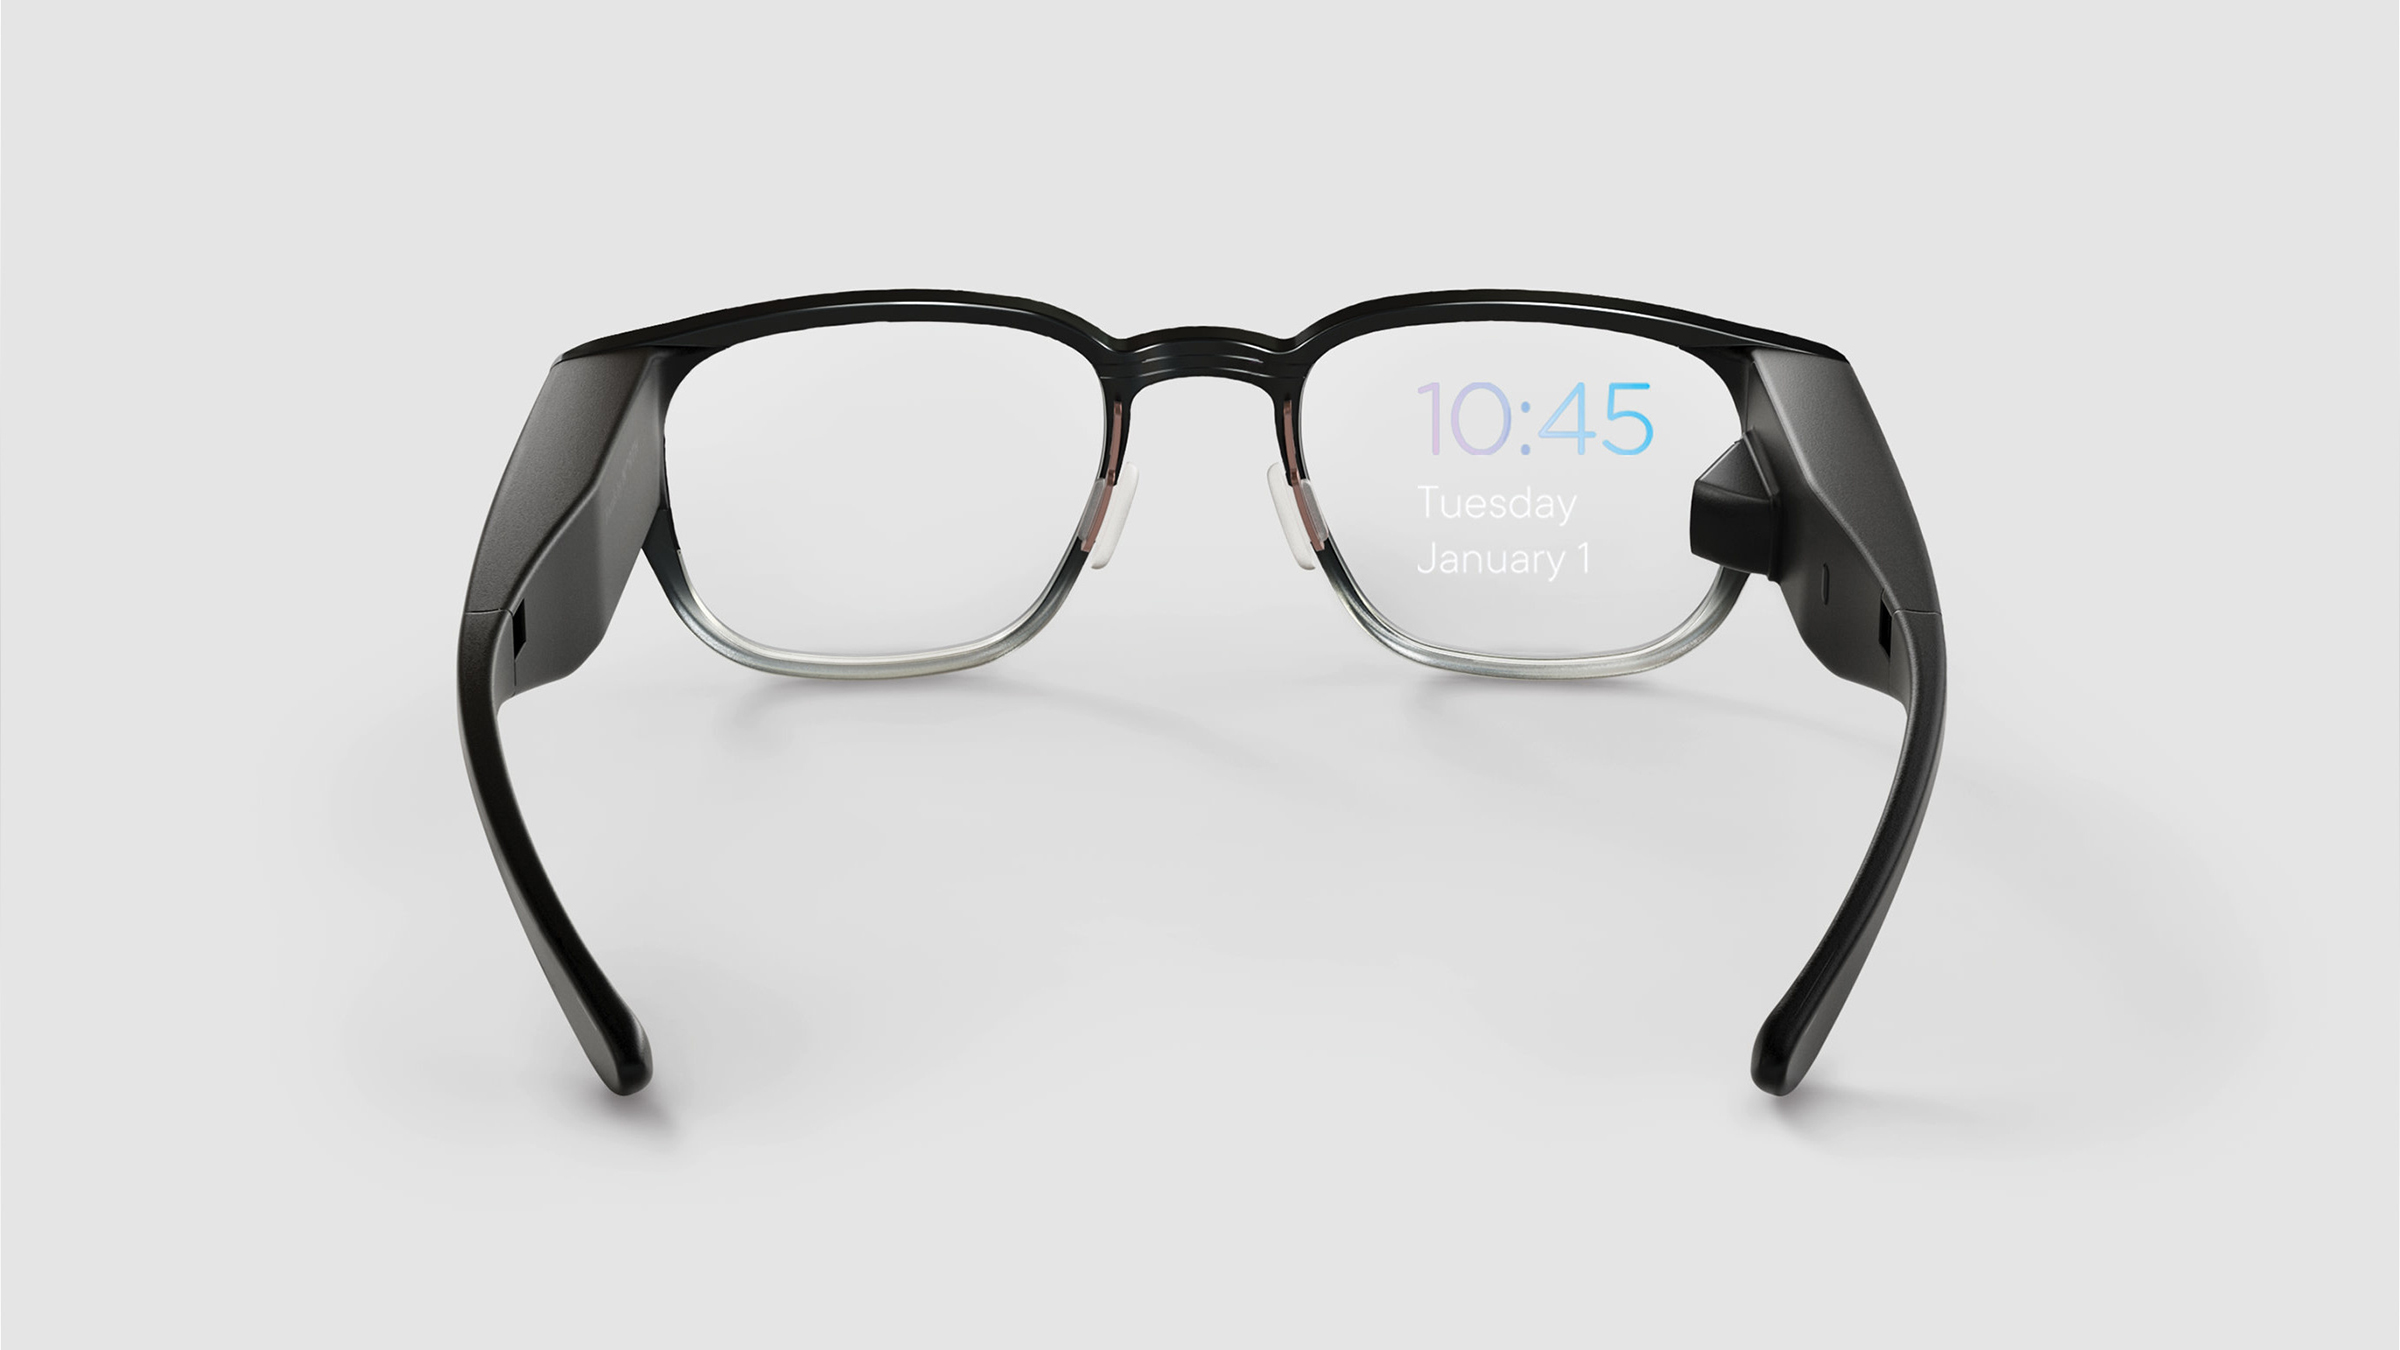 Smart frames: The next big thing in Wearable Tech